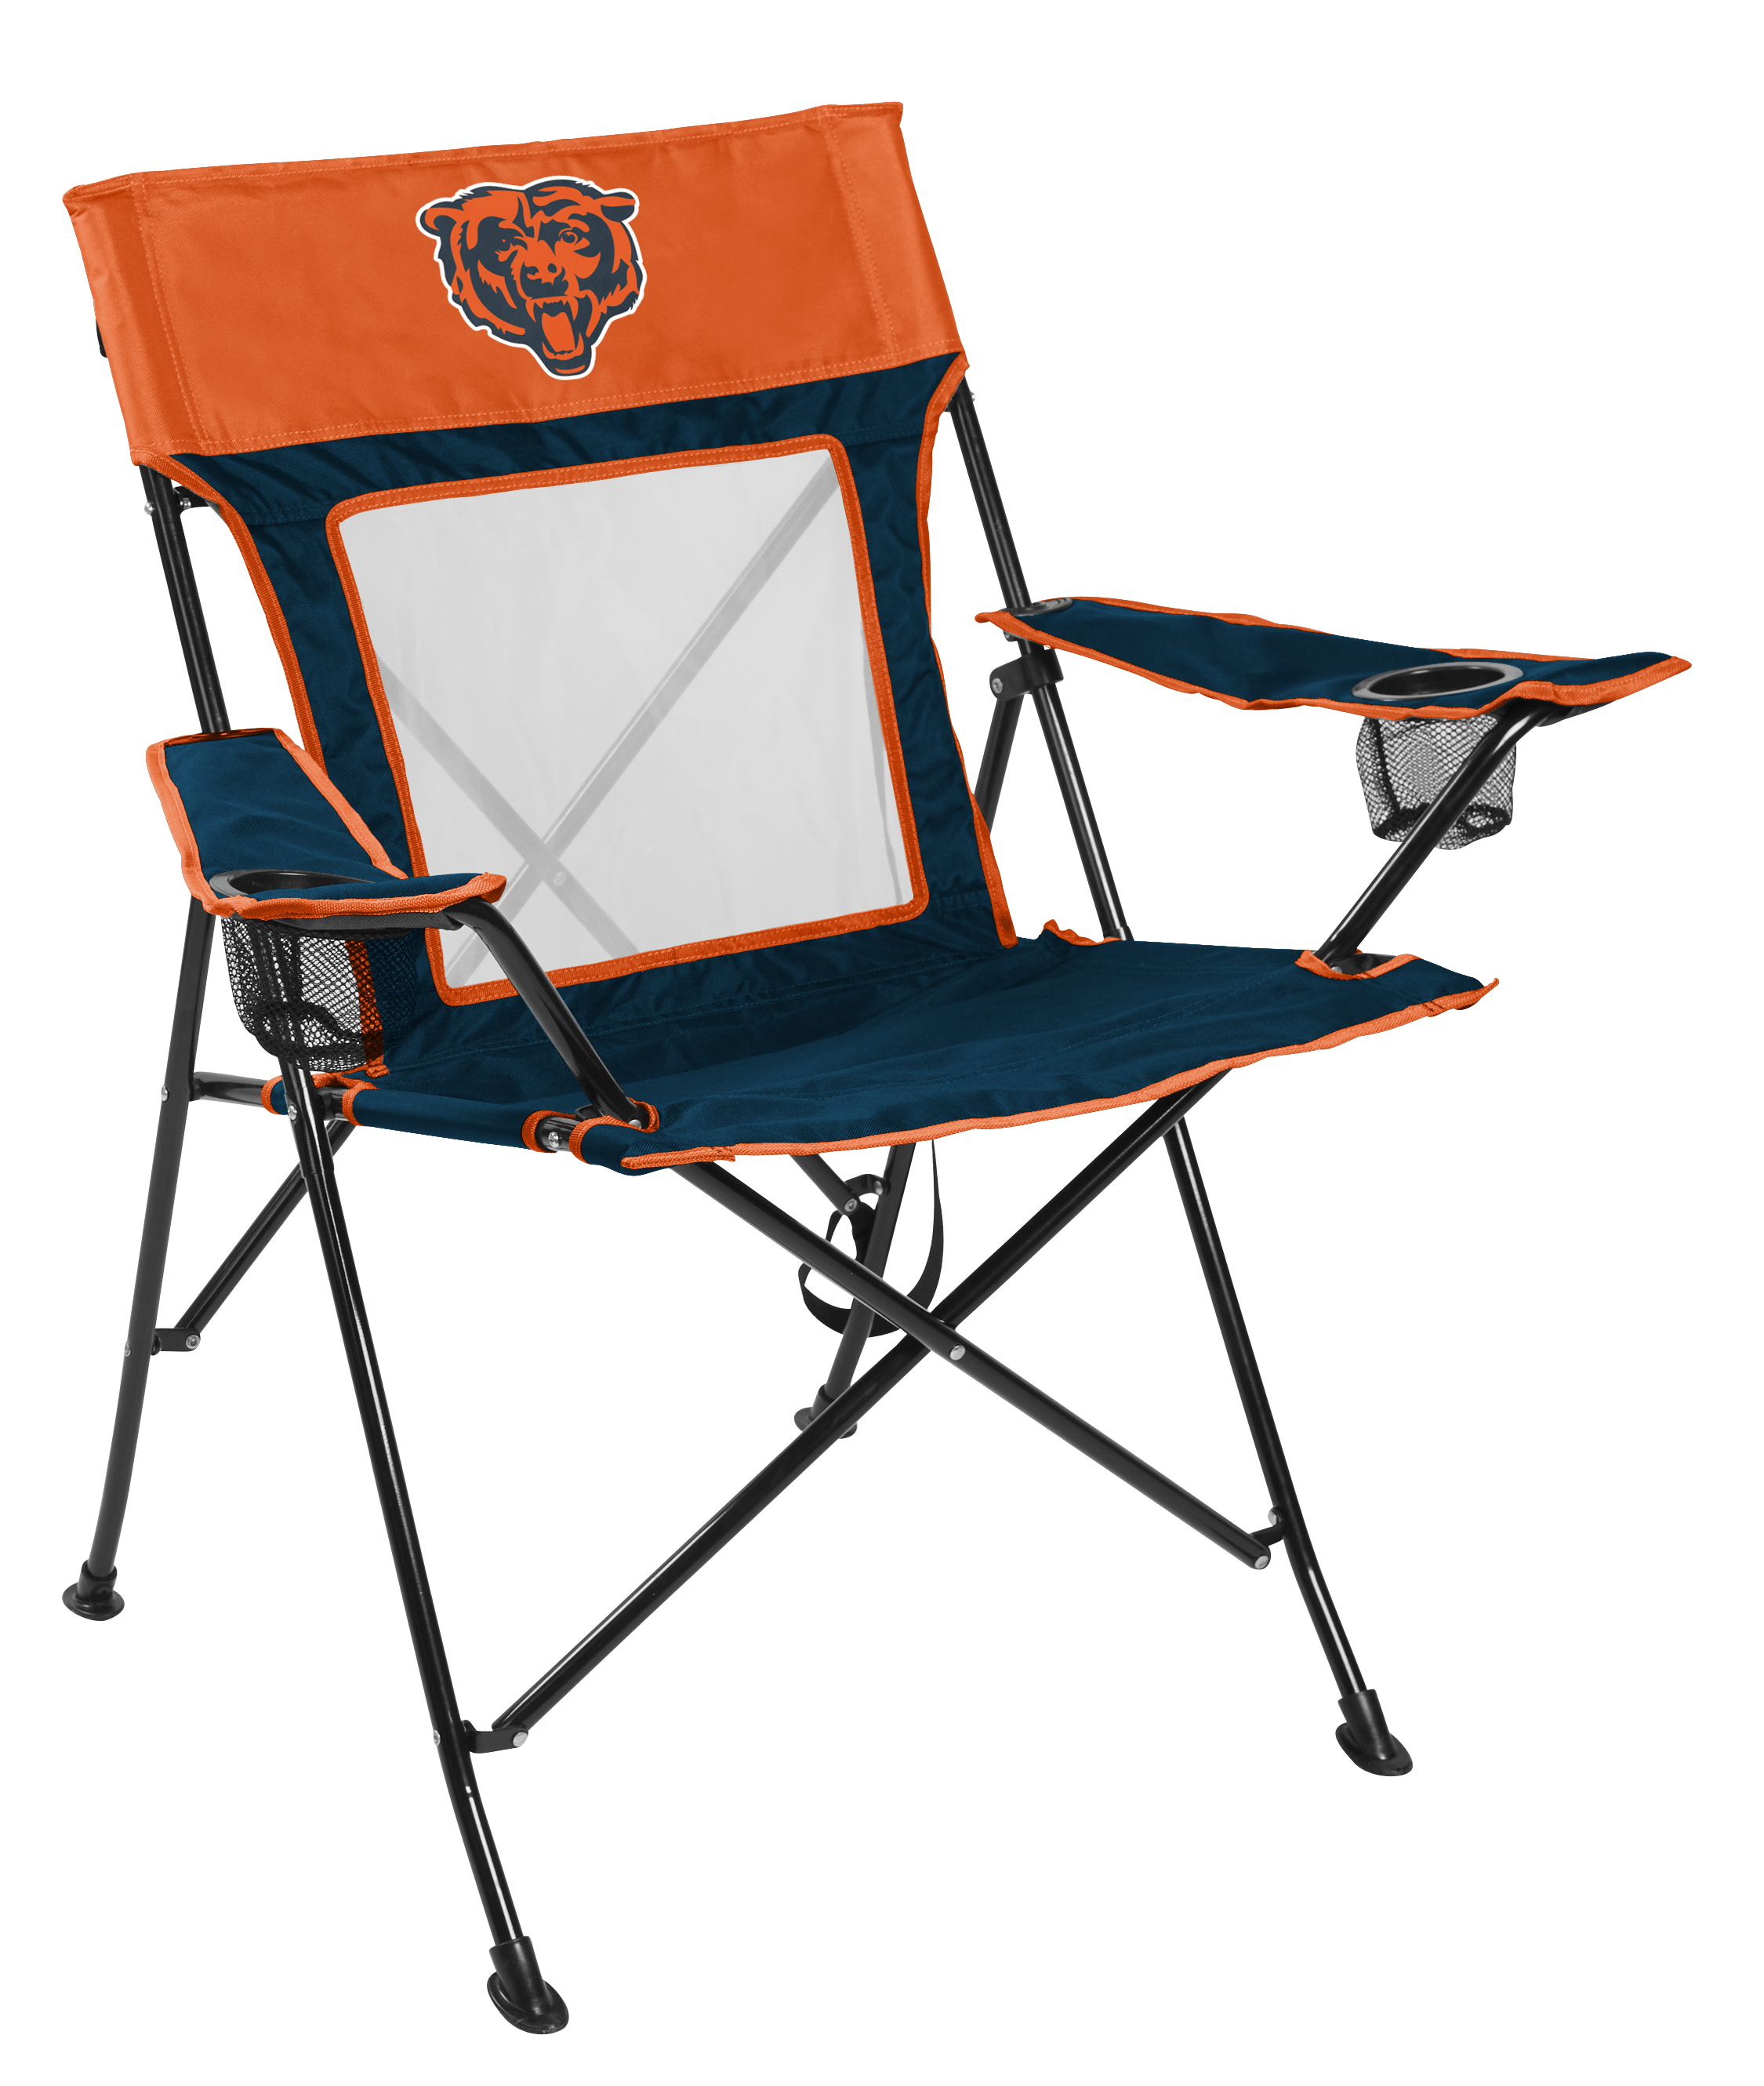 Nfl Chicago Bears Quad Chair Quad Chair One Size Navy Furniture